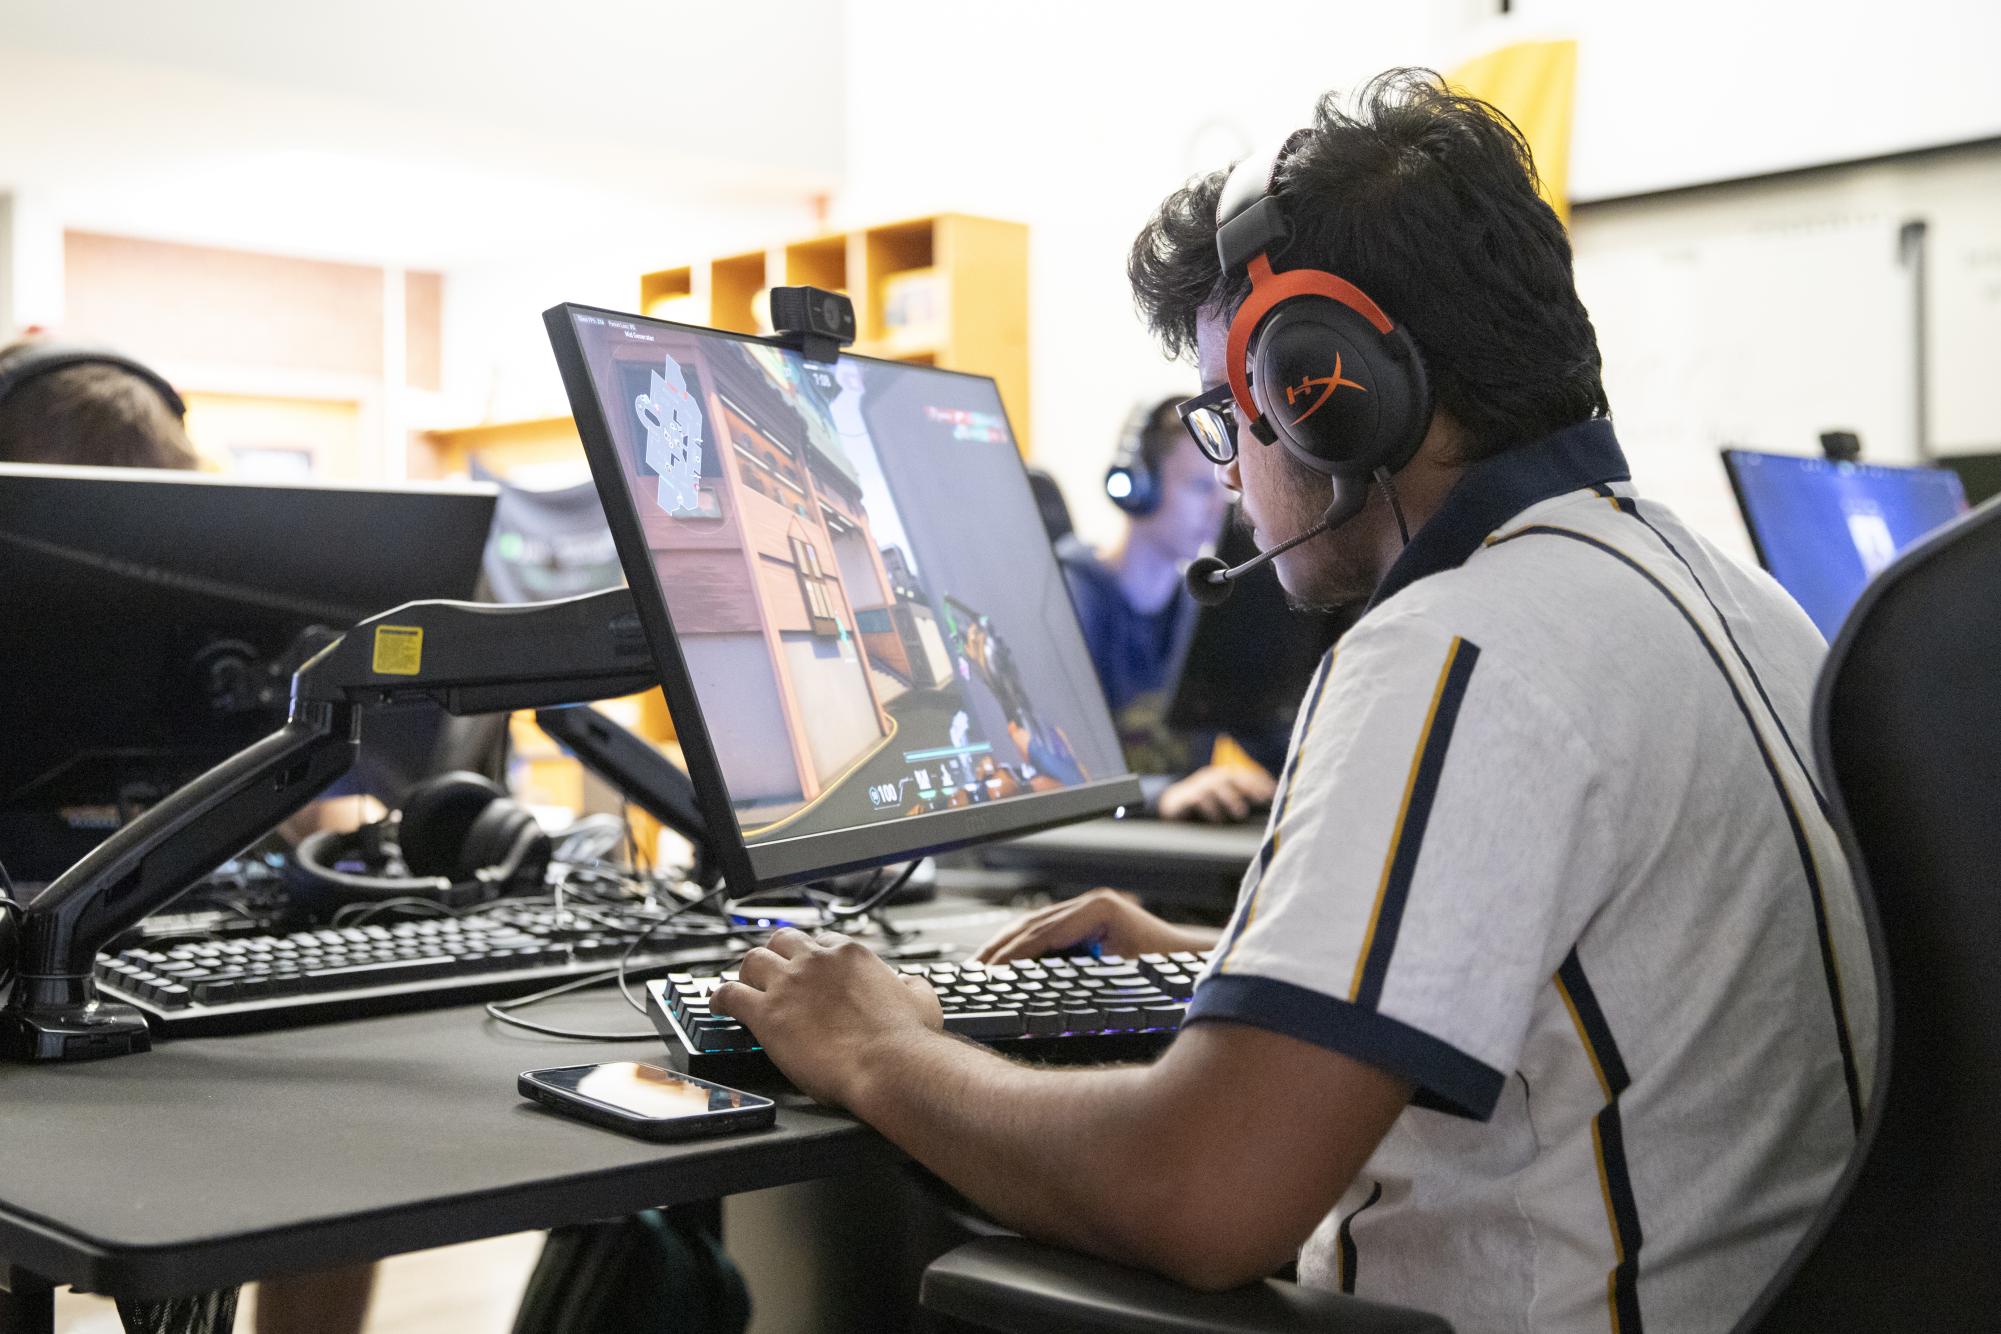 Esports team prepares for new season after tryouts – The Sunflower